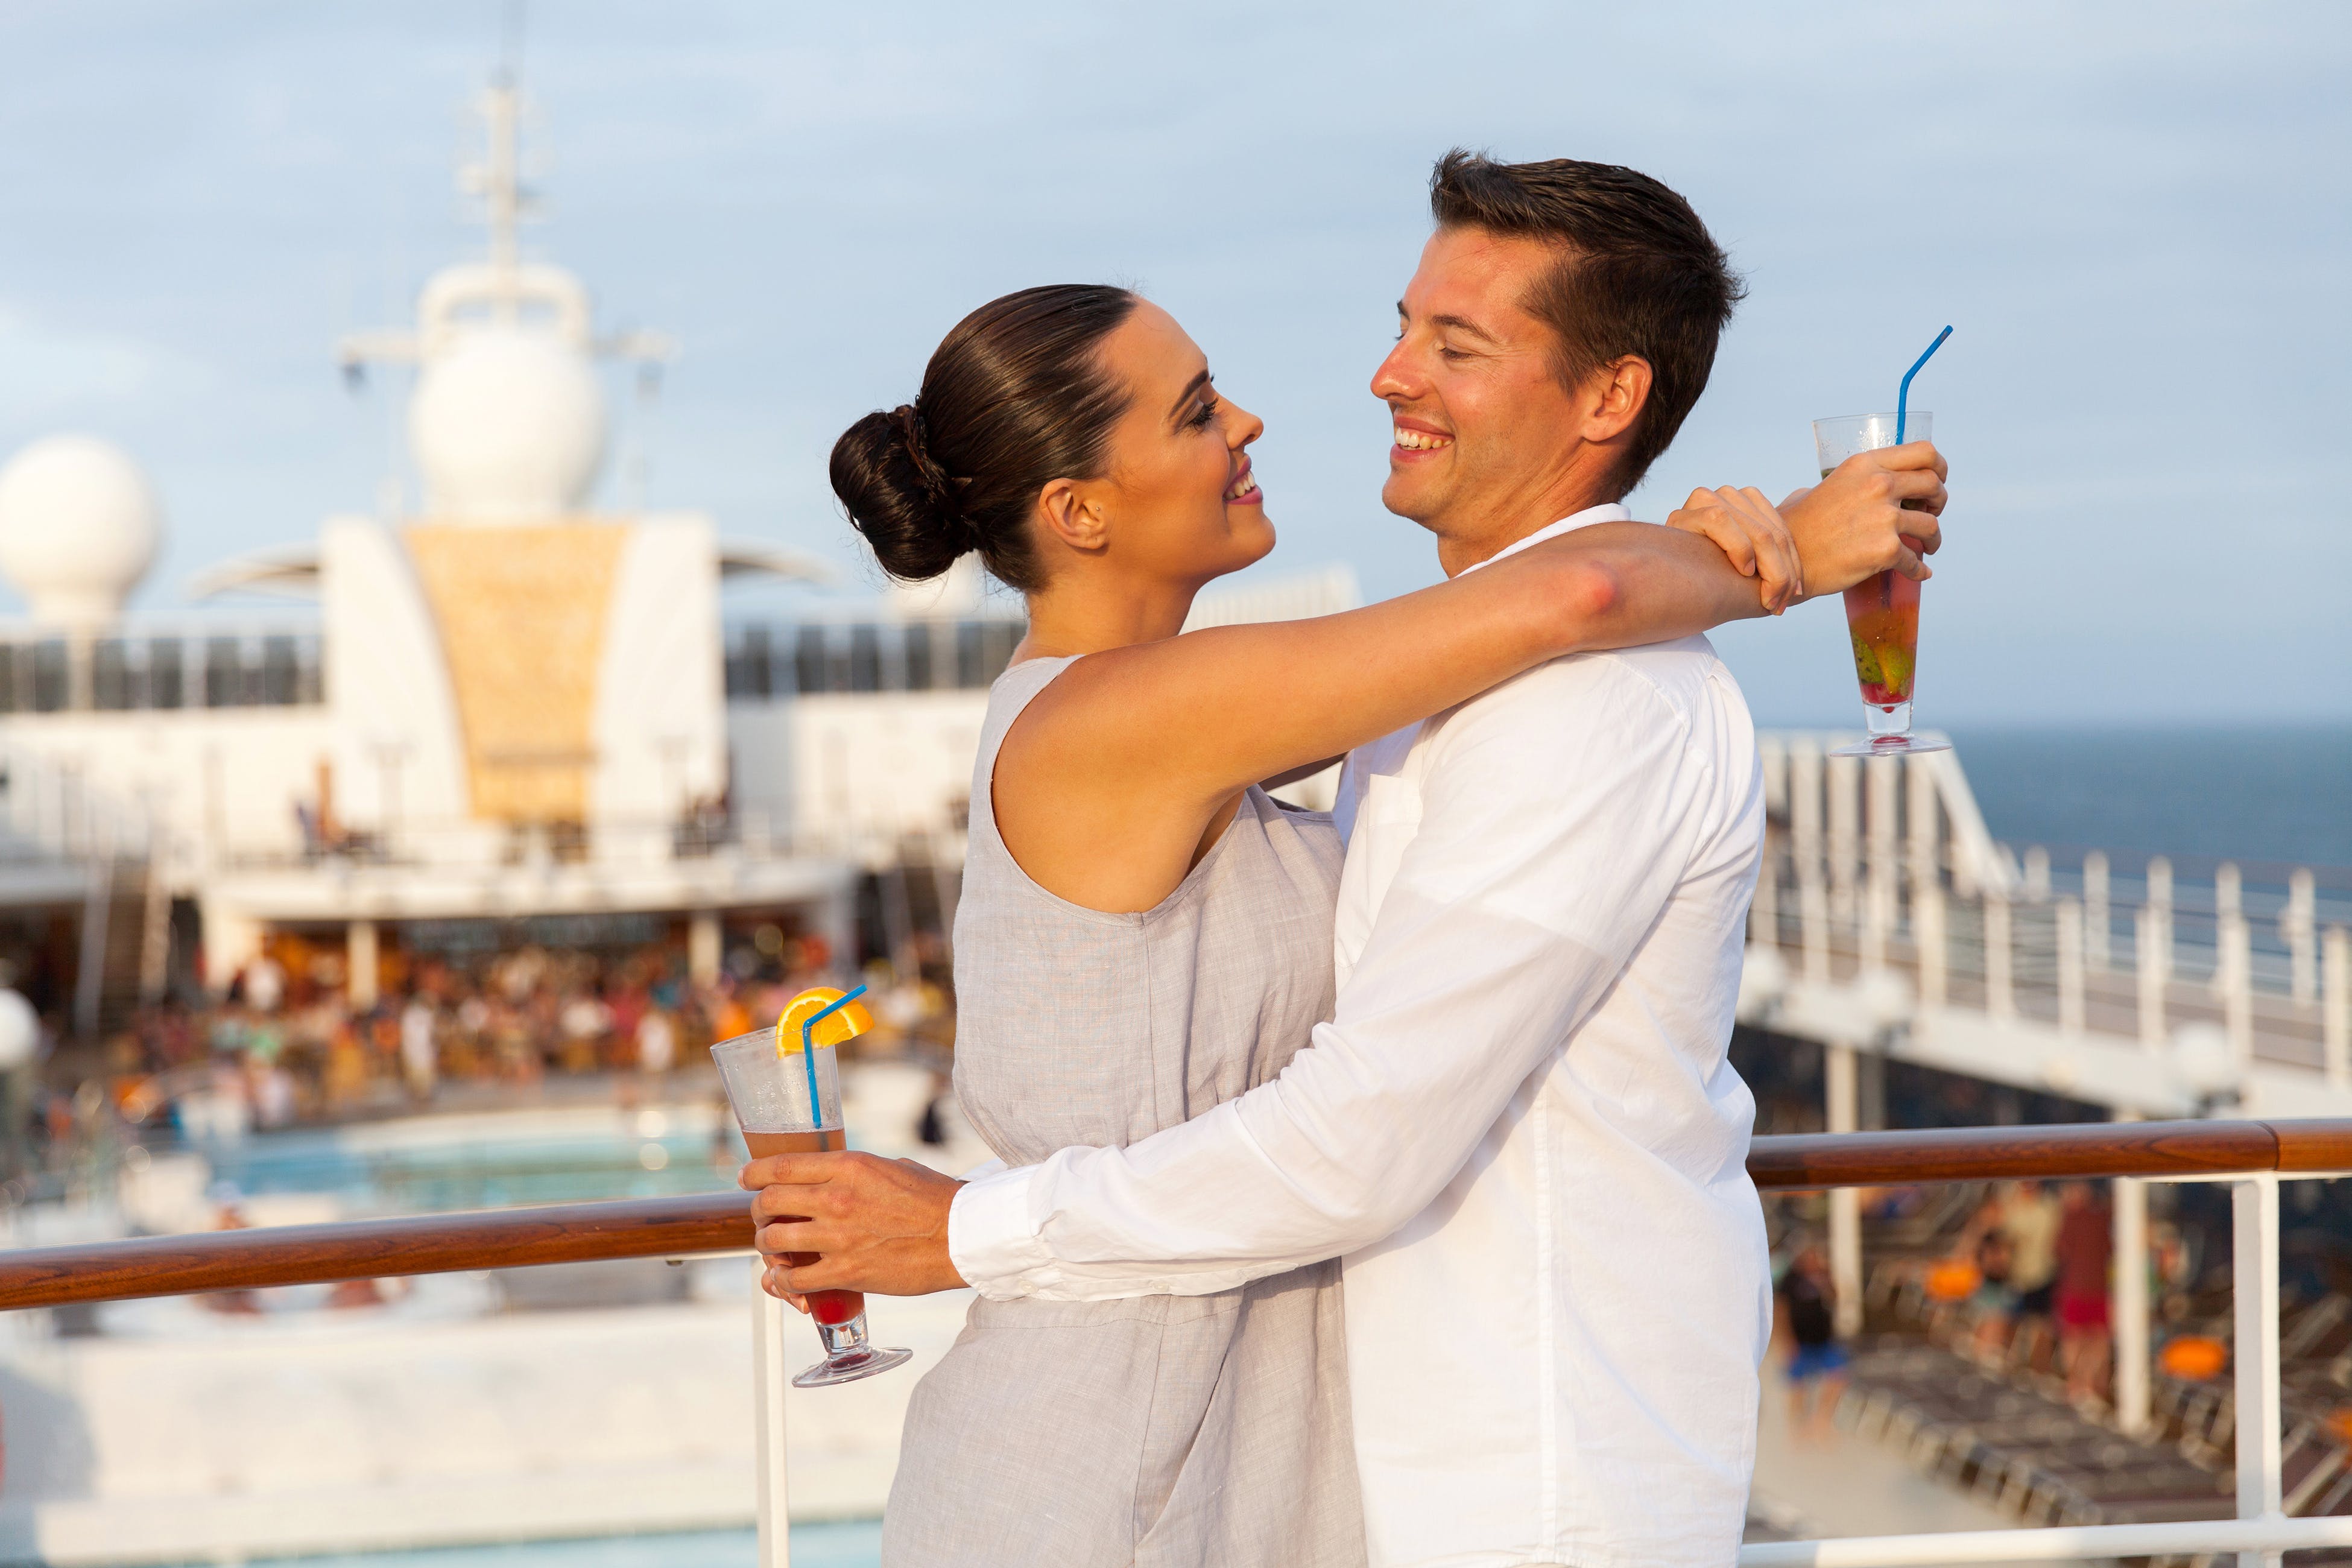 best us cruise lines for couples